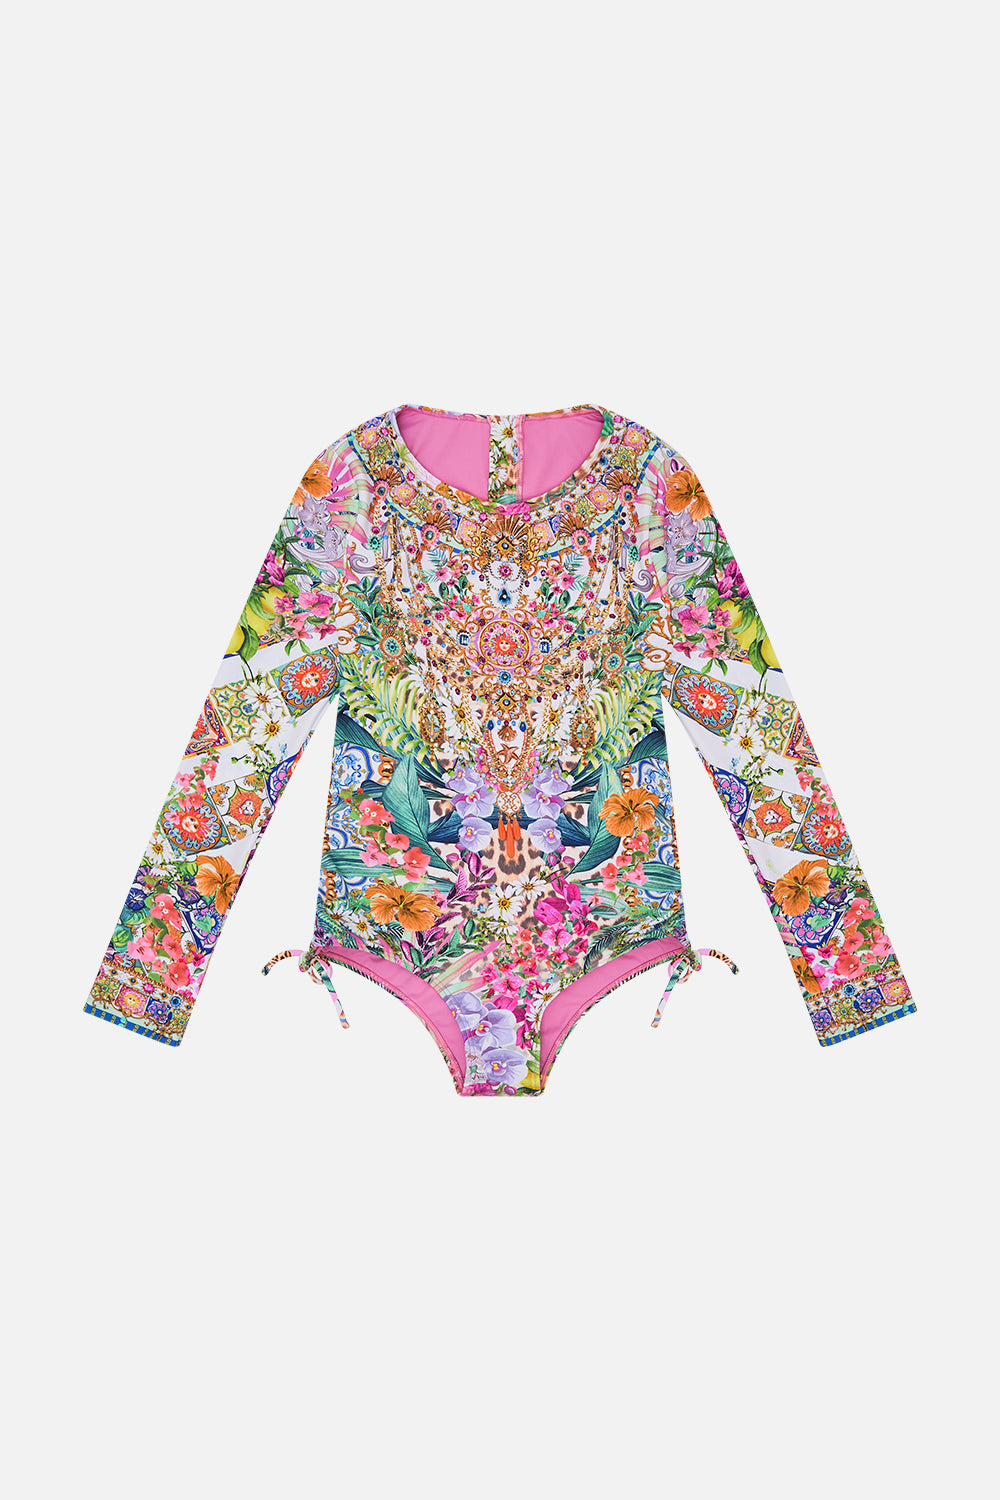 Product view of Milla By CAMILLA kids paddlesuit swimsuit in Flowers Of Neptune print 